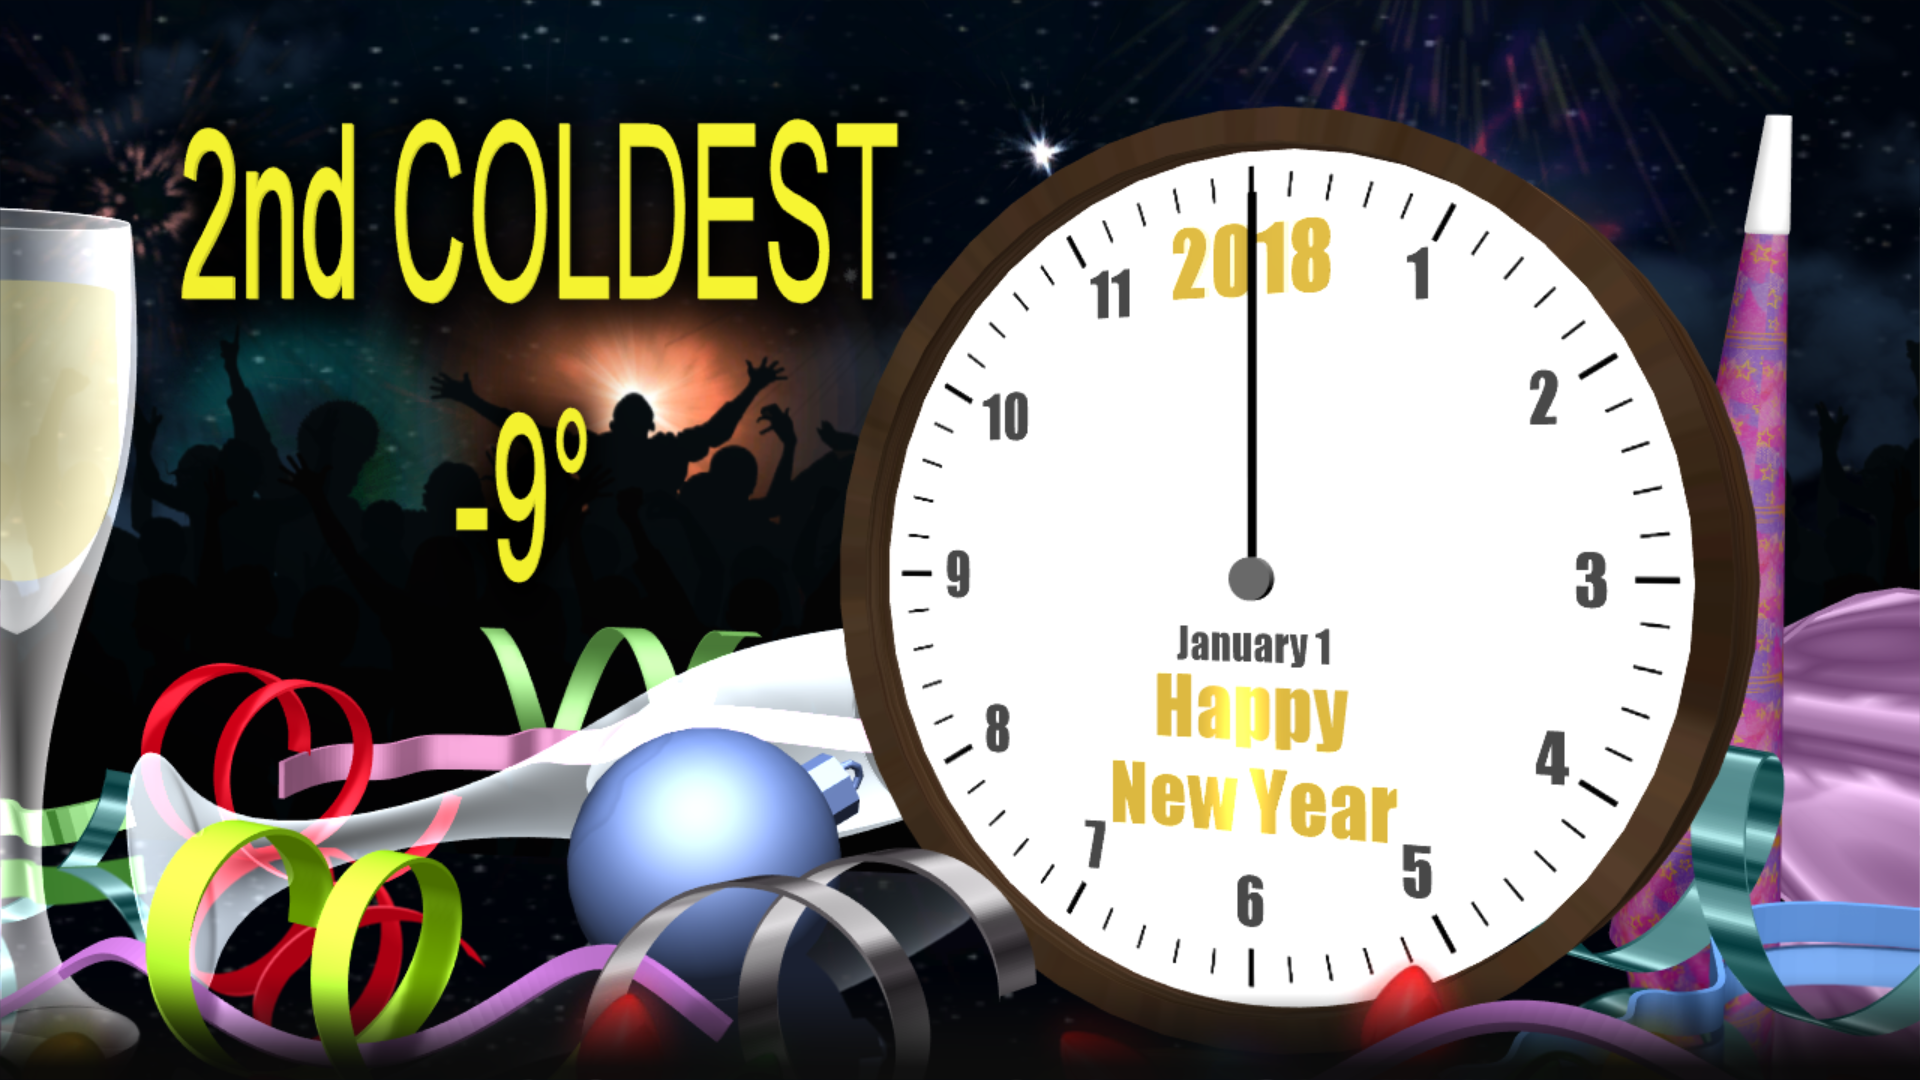 It's The Second Coldest New Year's Eve In Record History For Duluth